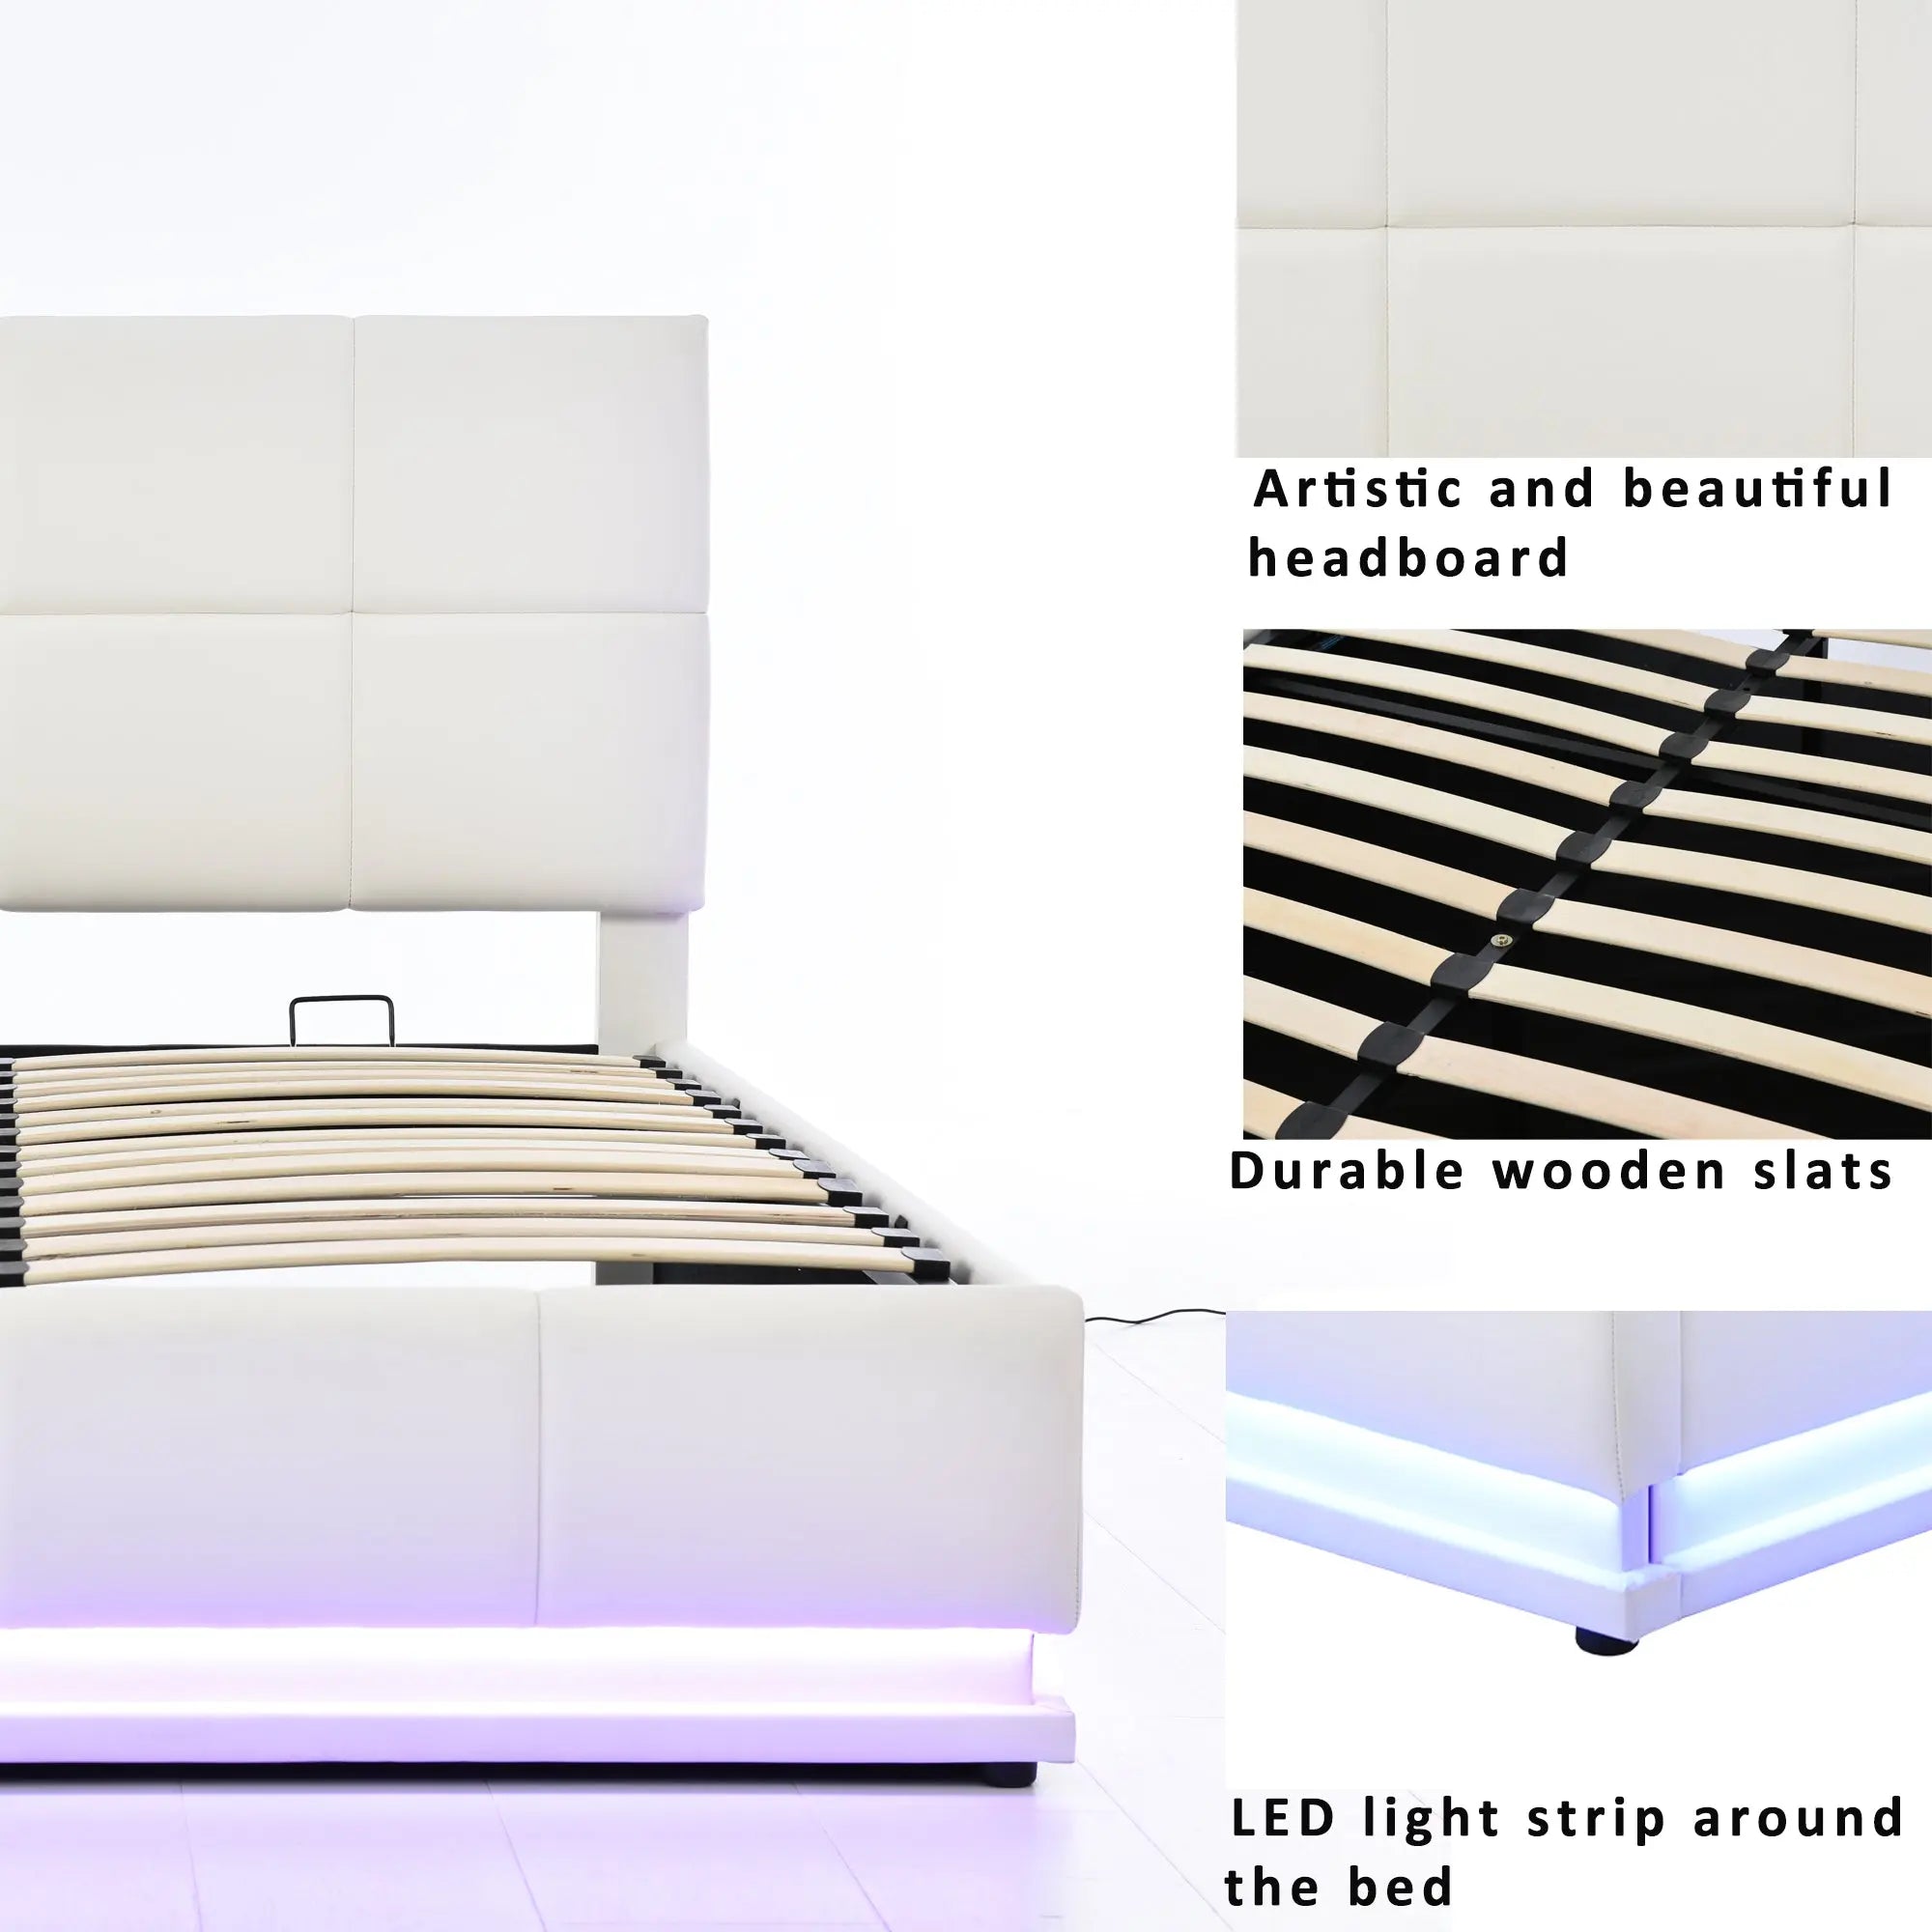 Bellemave® Tufted Upholstered Platform Bed with Hydraulic Storage System,PU Storage Bed with LED Lights and USB charger Bellemave®